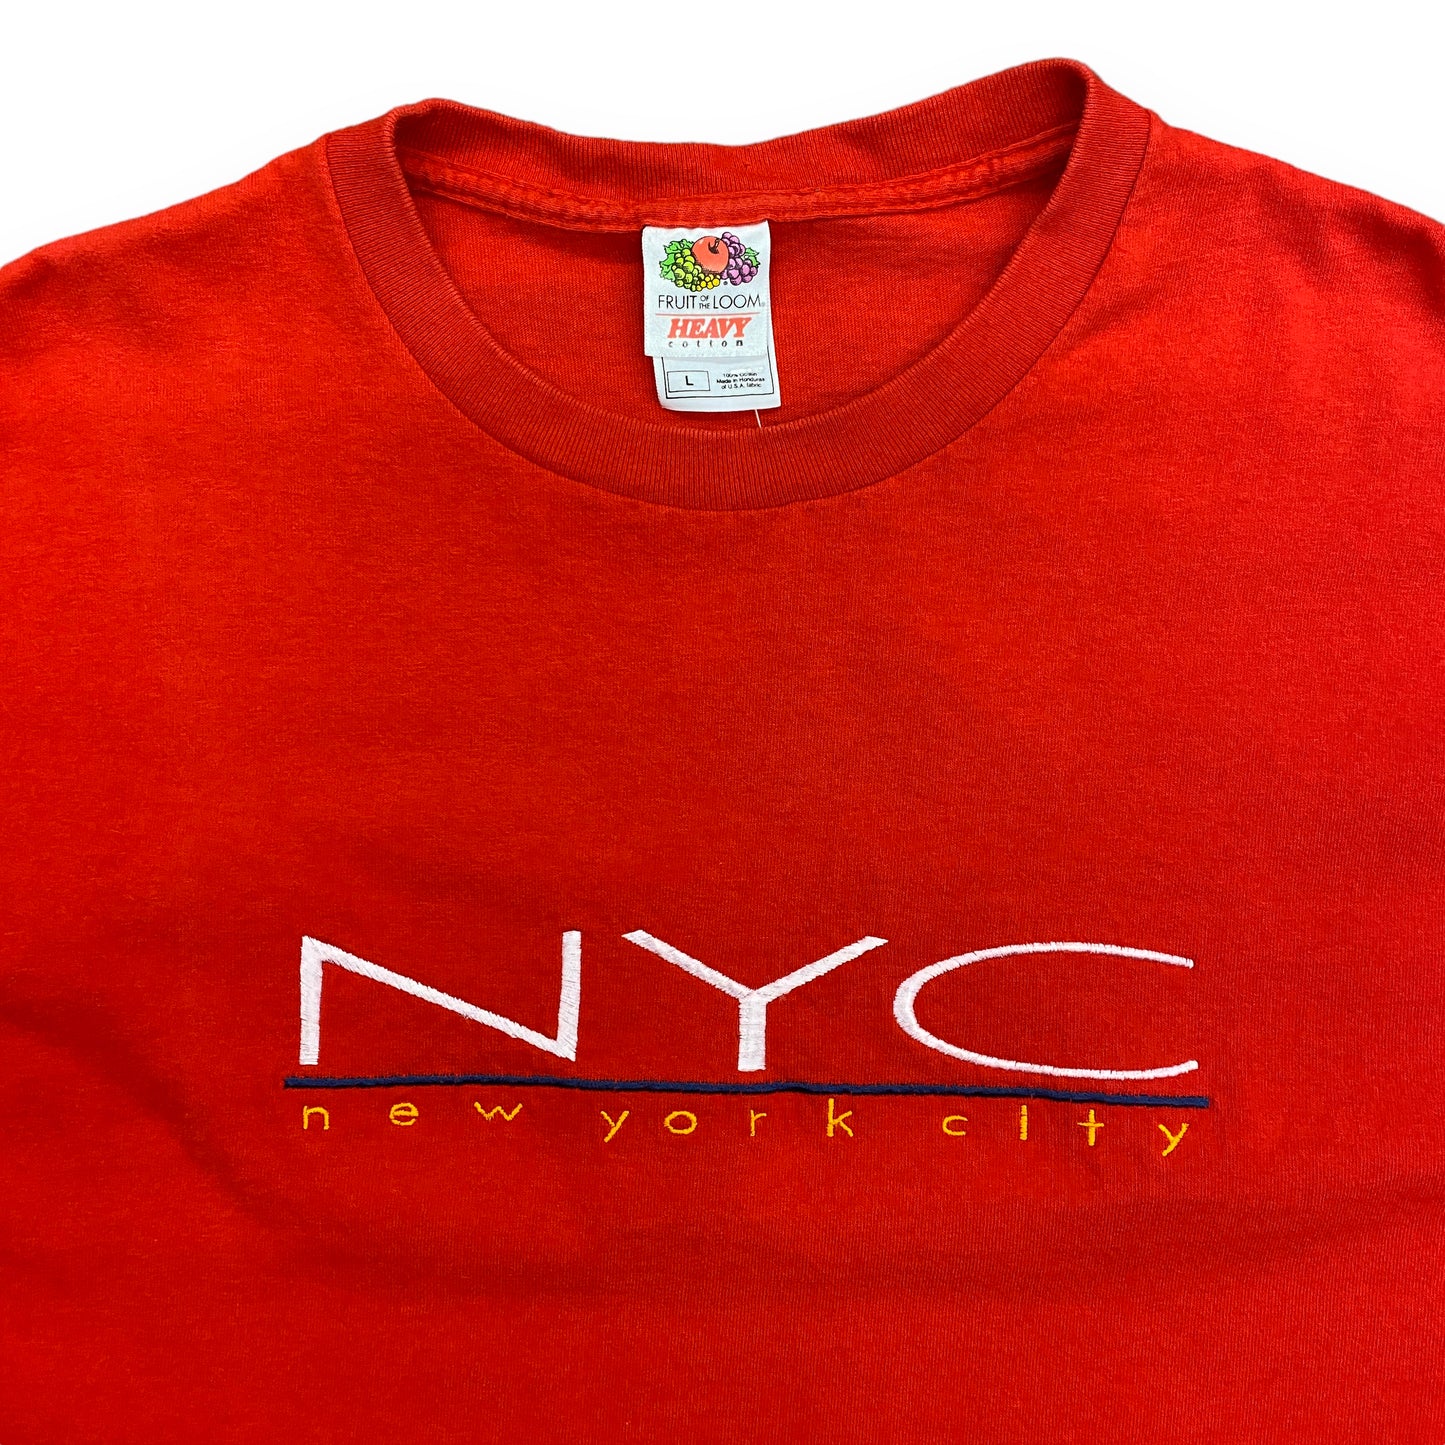 Vintage New York City Embroidered Red Tee - Size Large